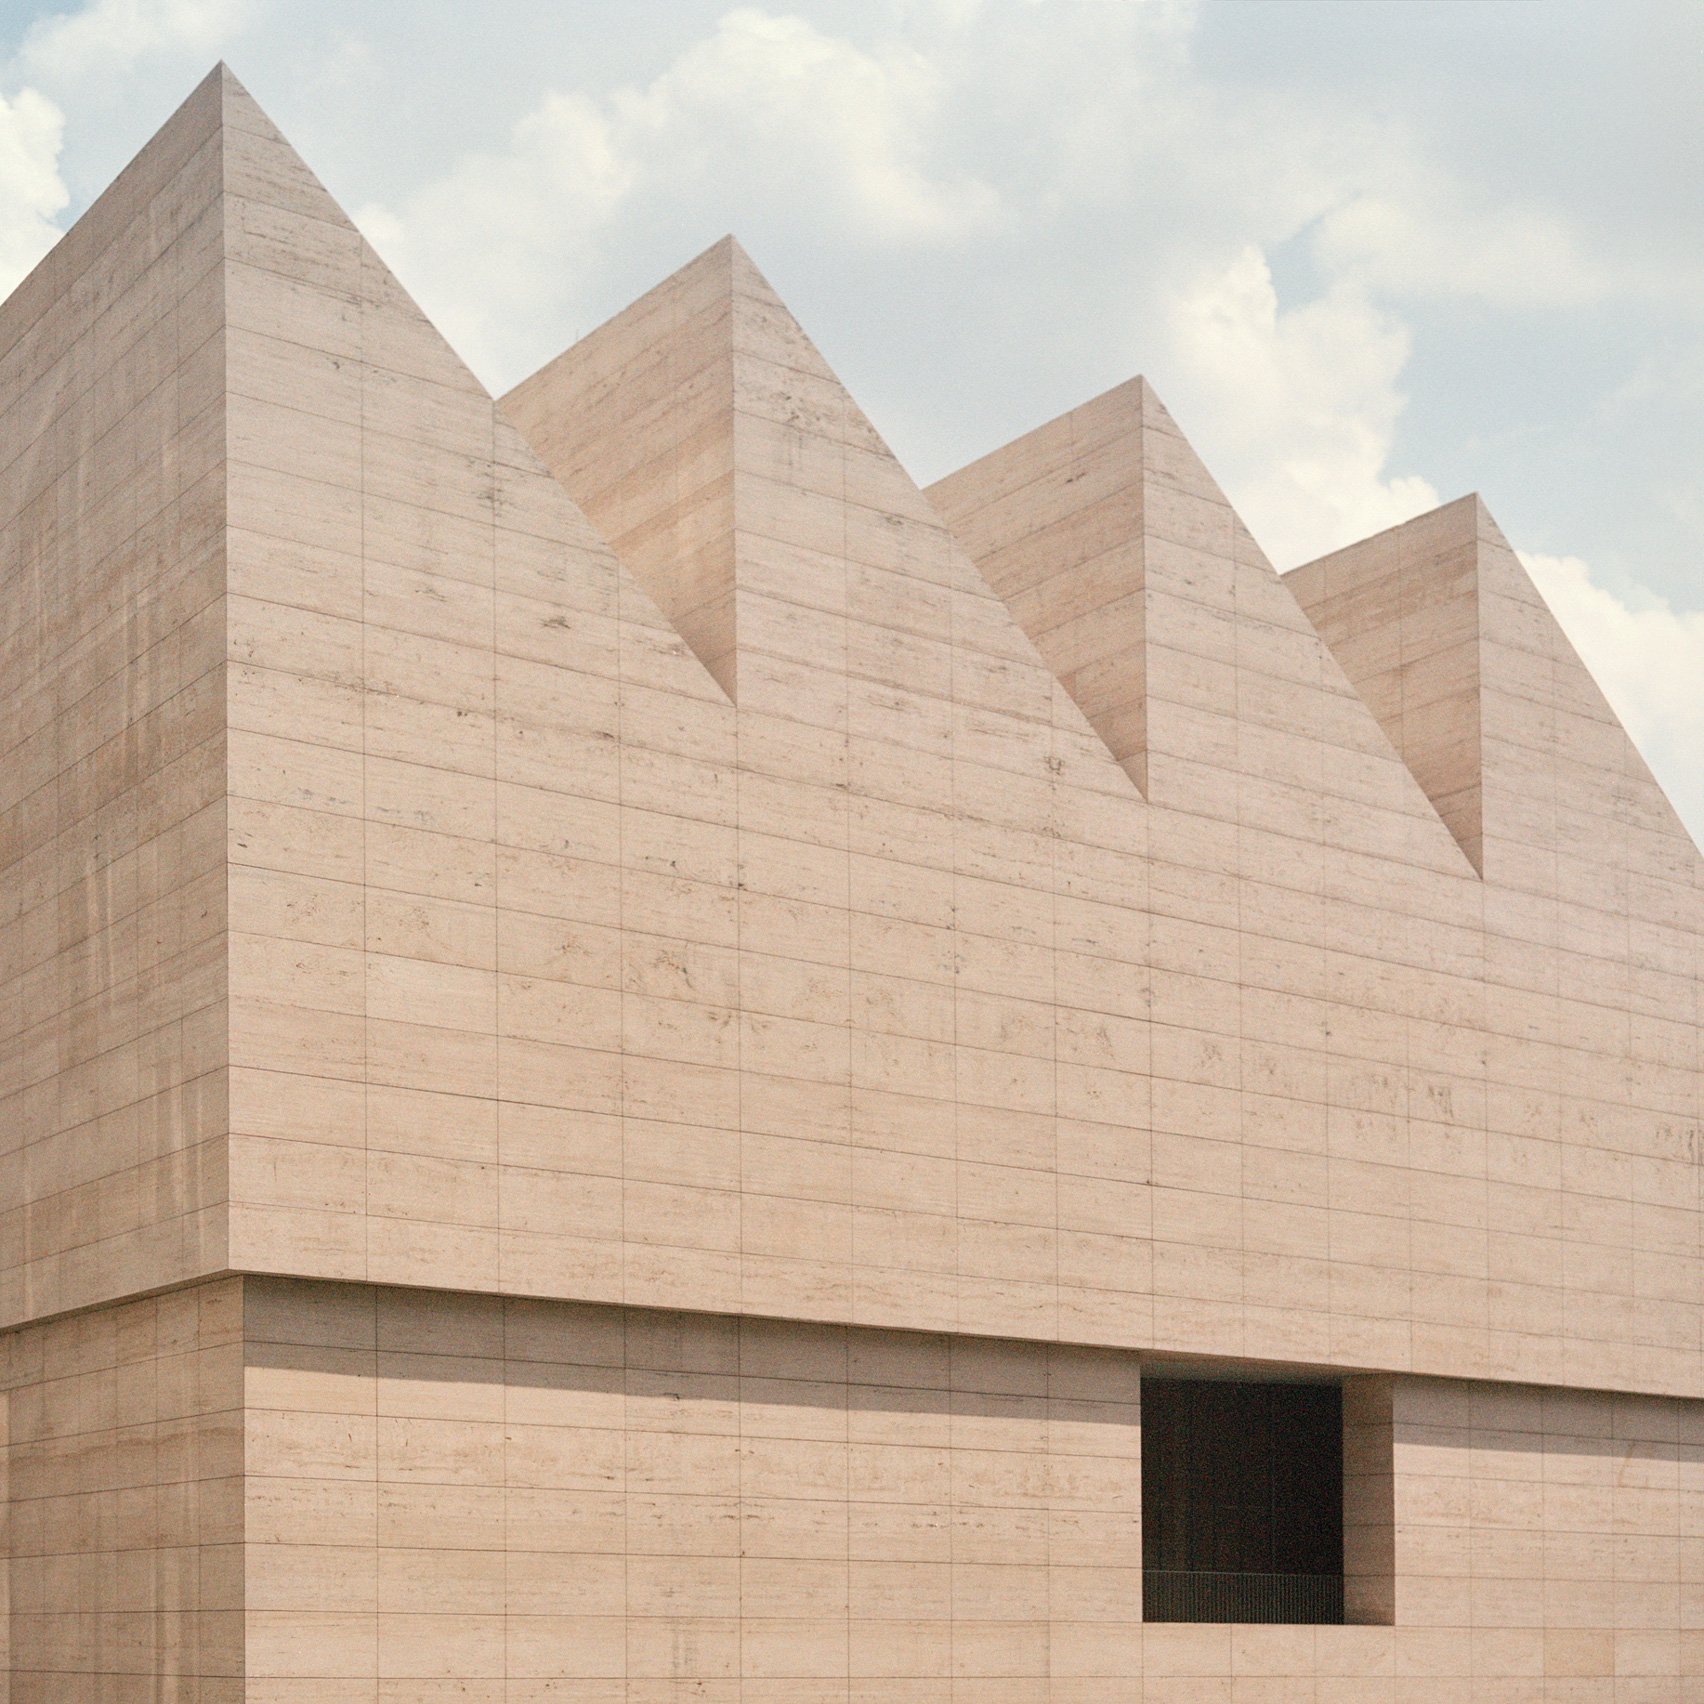 Museo Jumex by David Chipperfield, Mexico City, Mexico